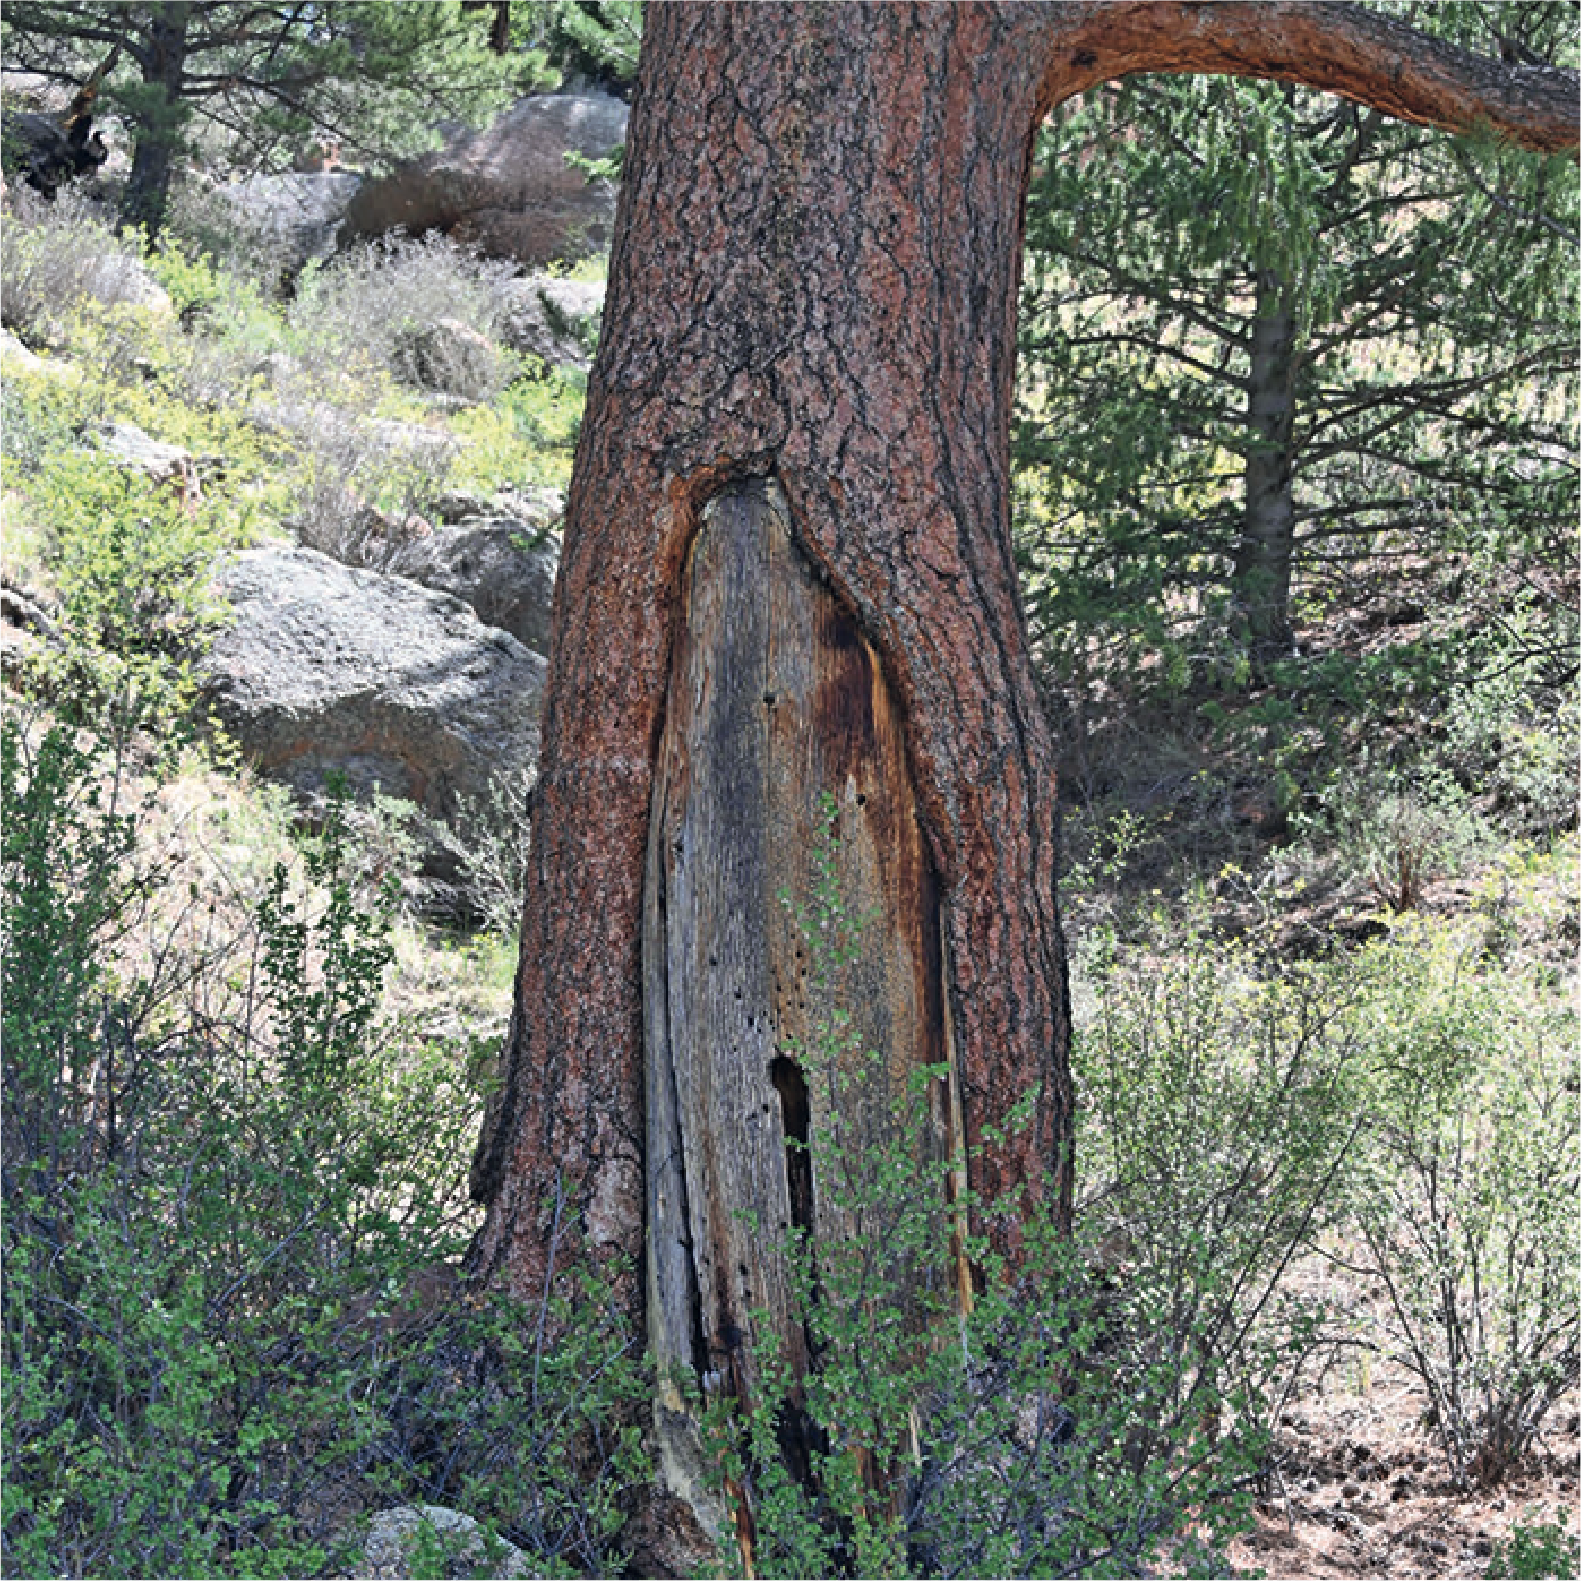 Ponderorsa pine trunk with large scar emphasized on the side.